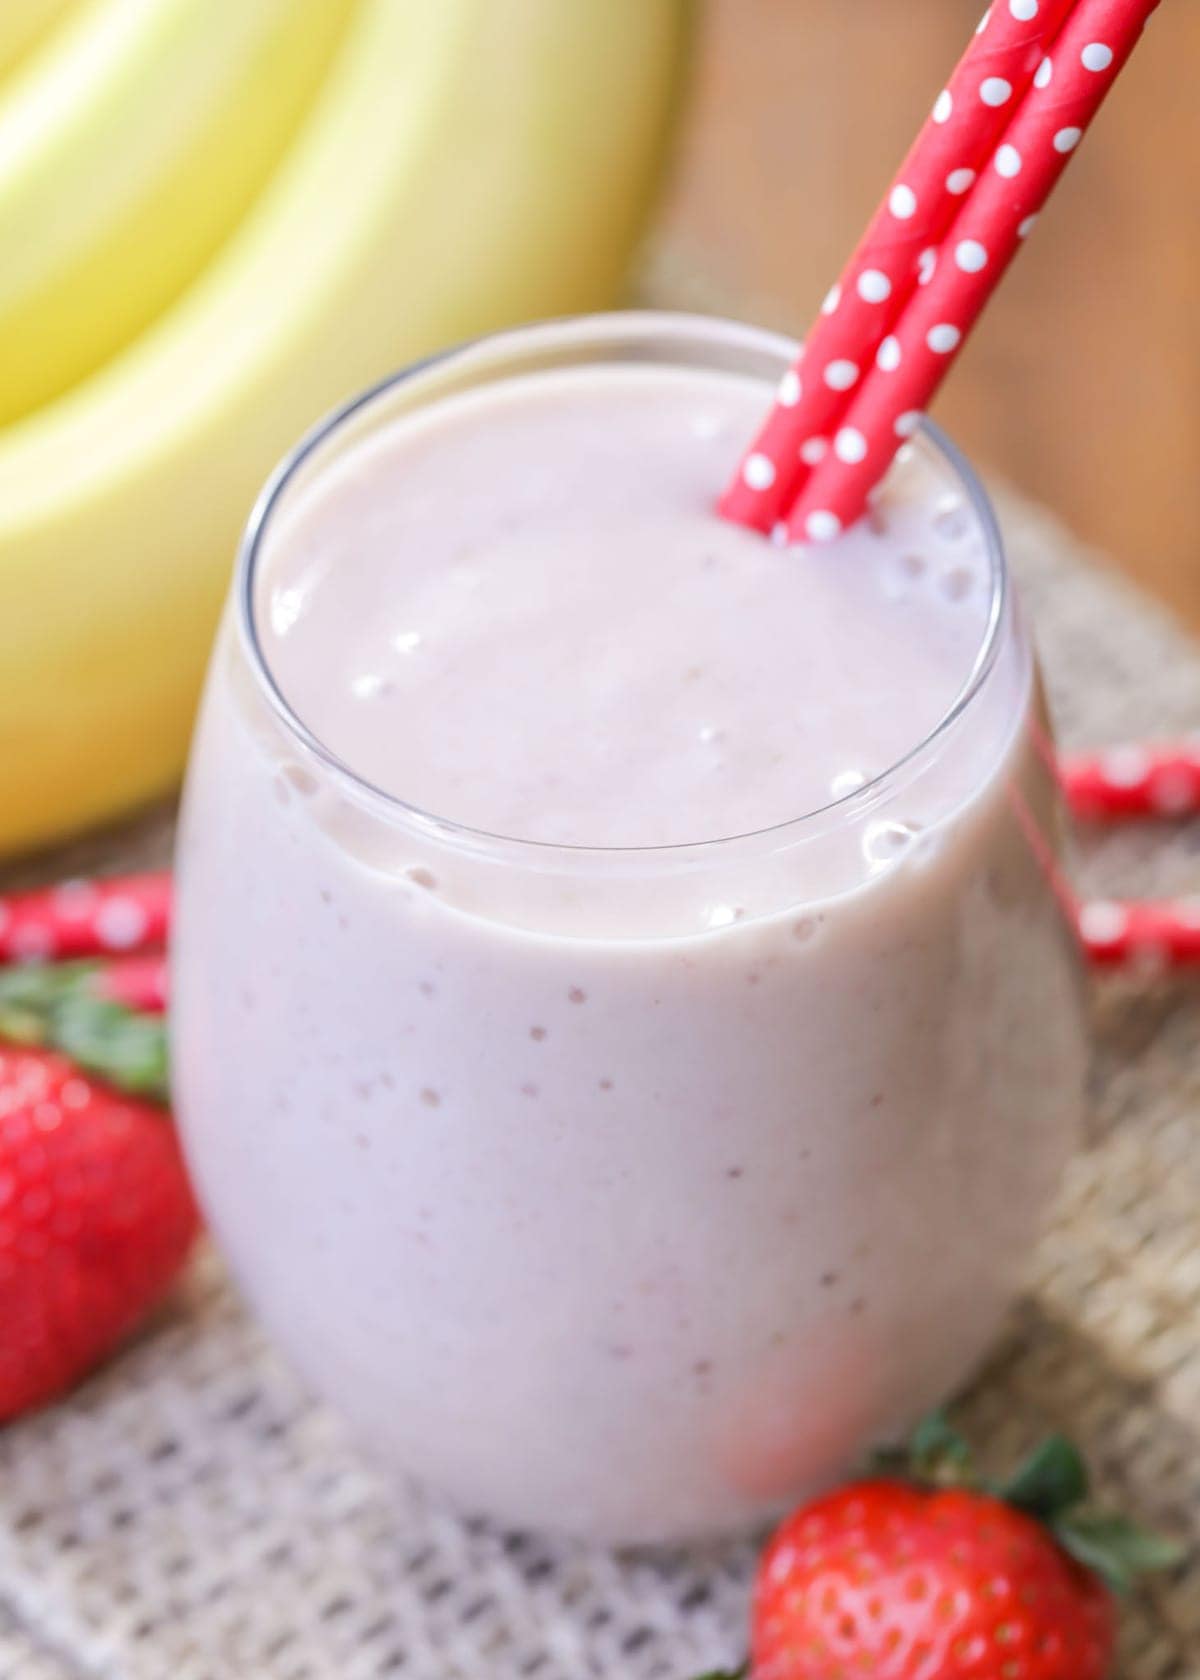 Pineapple banana smoothie - a glass filled with strawberry banana smoothie.